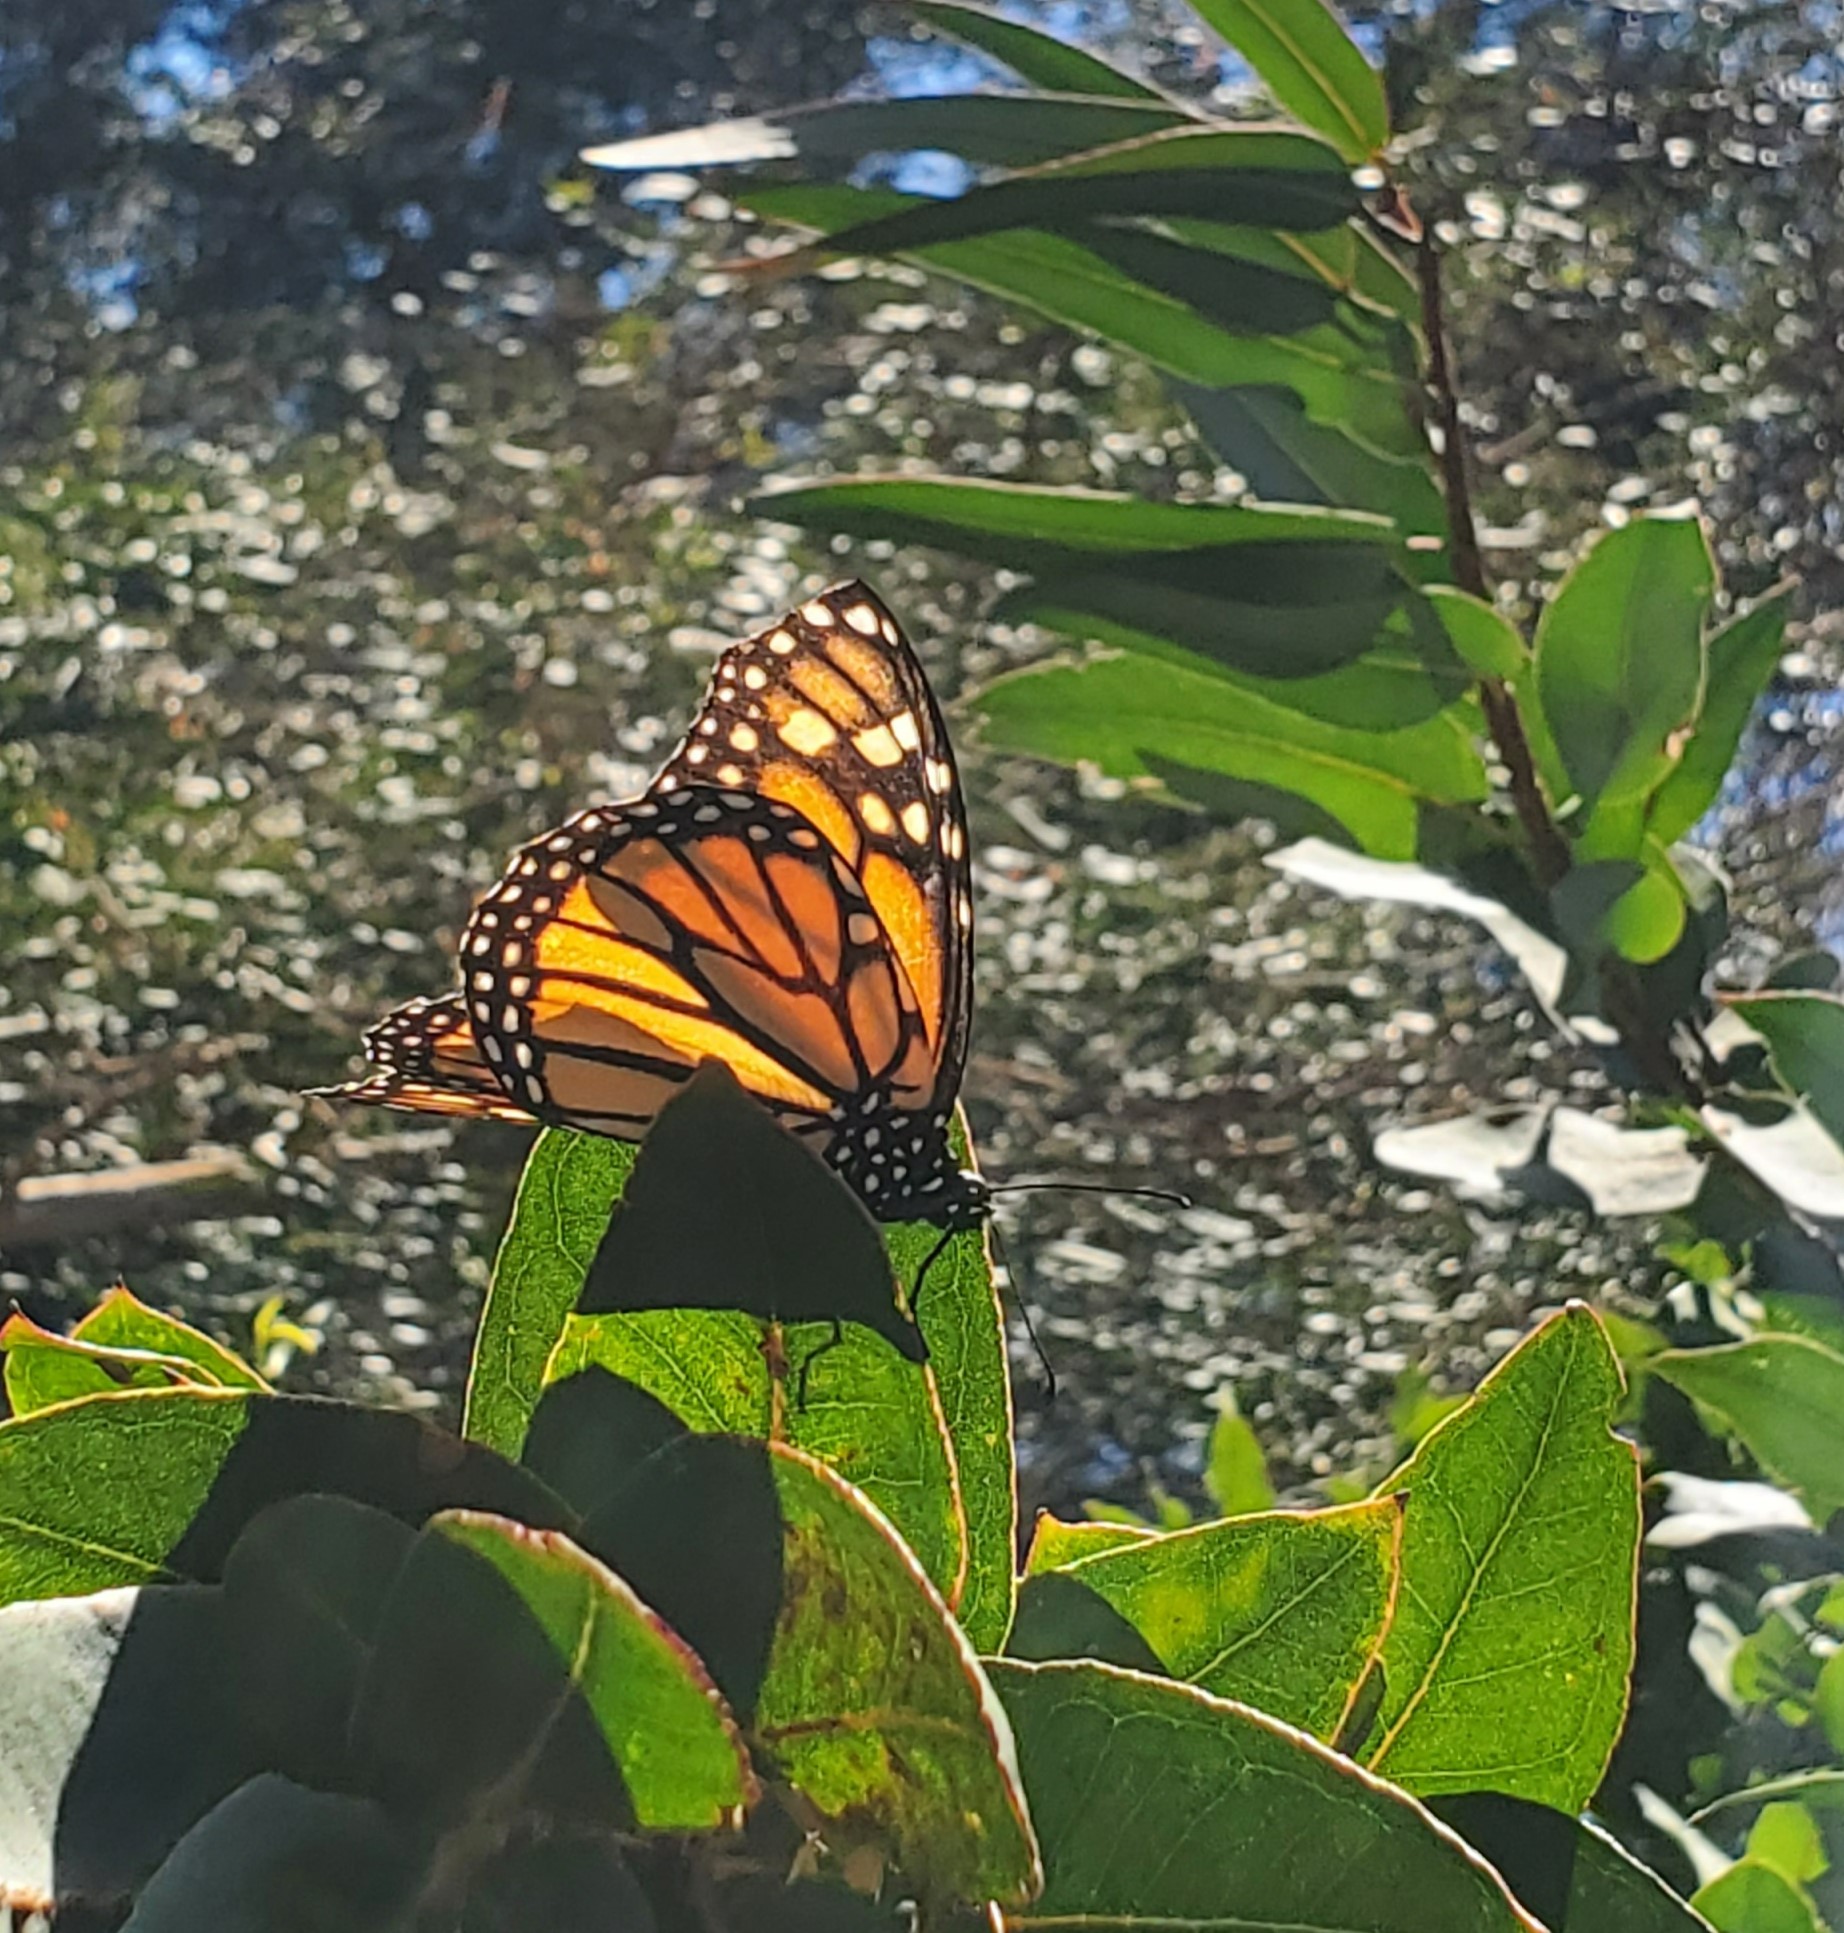 A yellow-orange butterfly on a tree branch.
